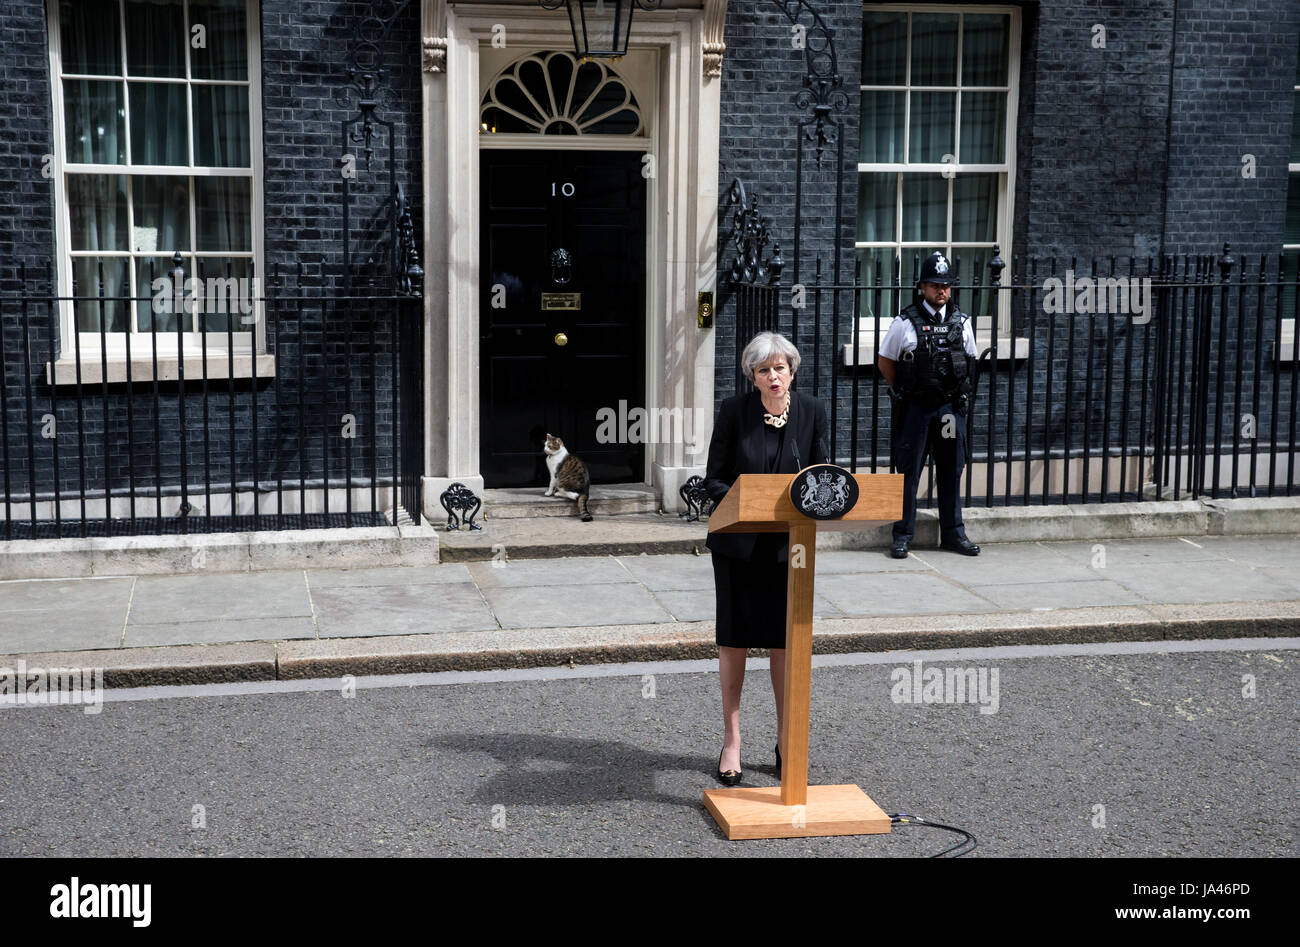 Prime Minister, Theresa May, makes a statement about security following the London June 3rd terror attack at London Bridge Stock Photo